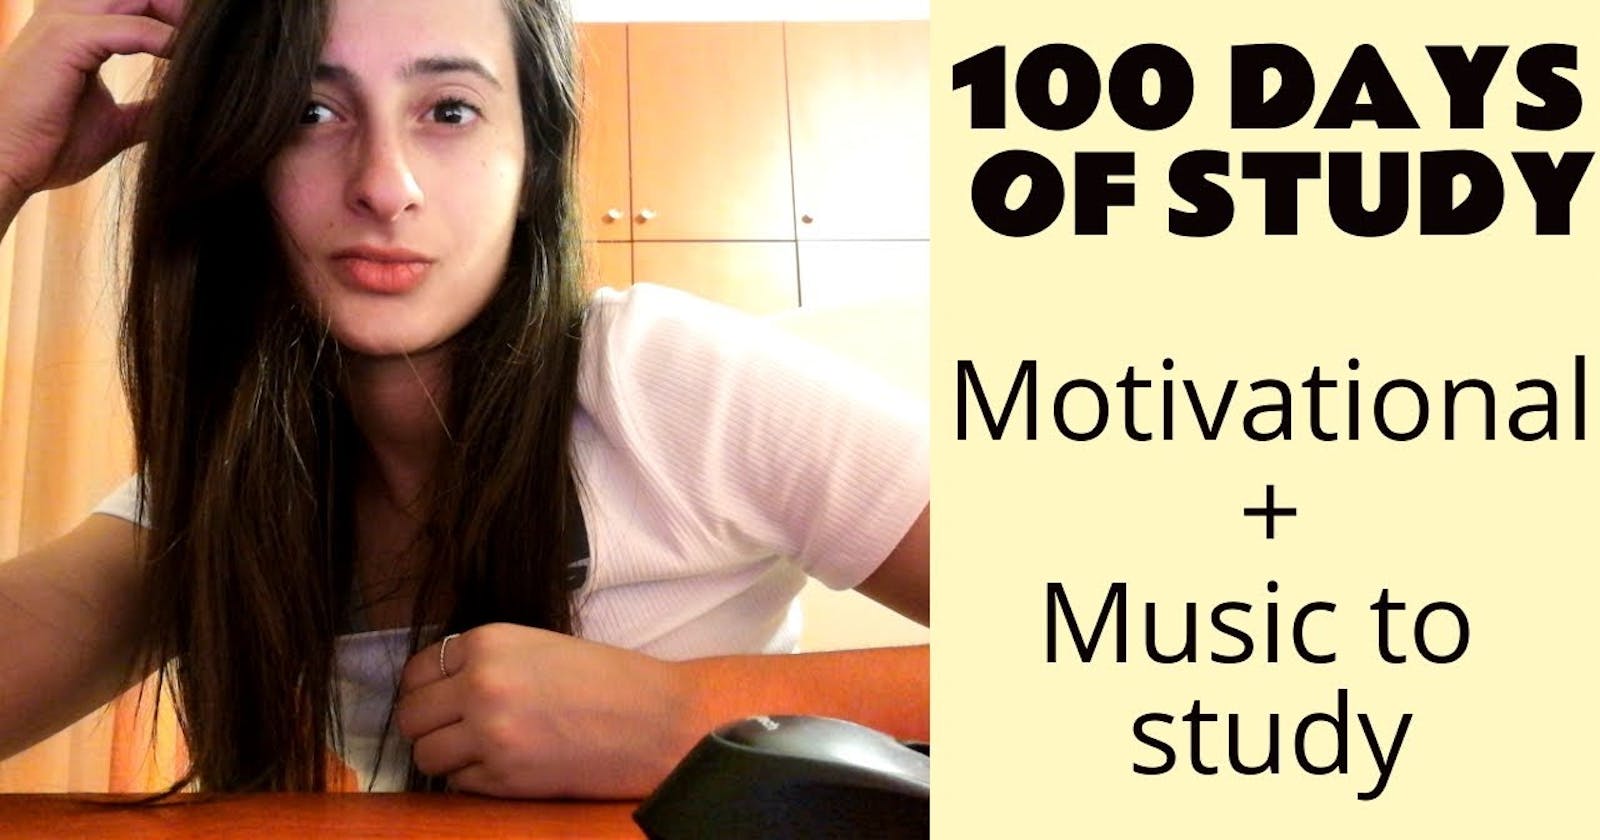 100 Days Of Study in Timelapse 📚| Motivational | 🎼Music to study